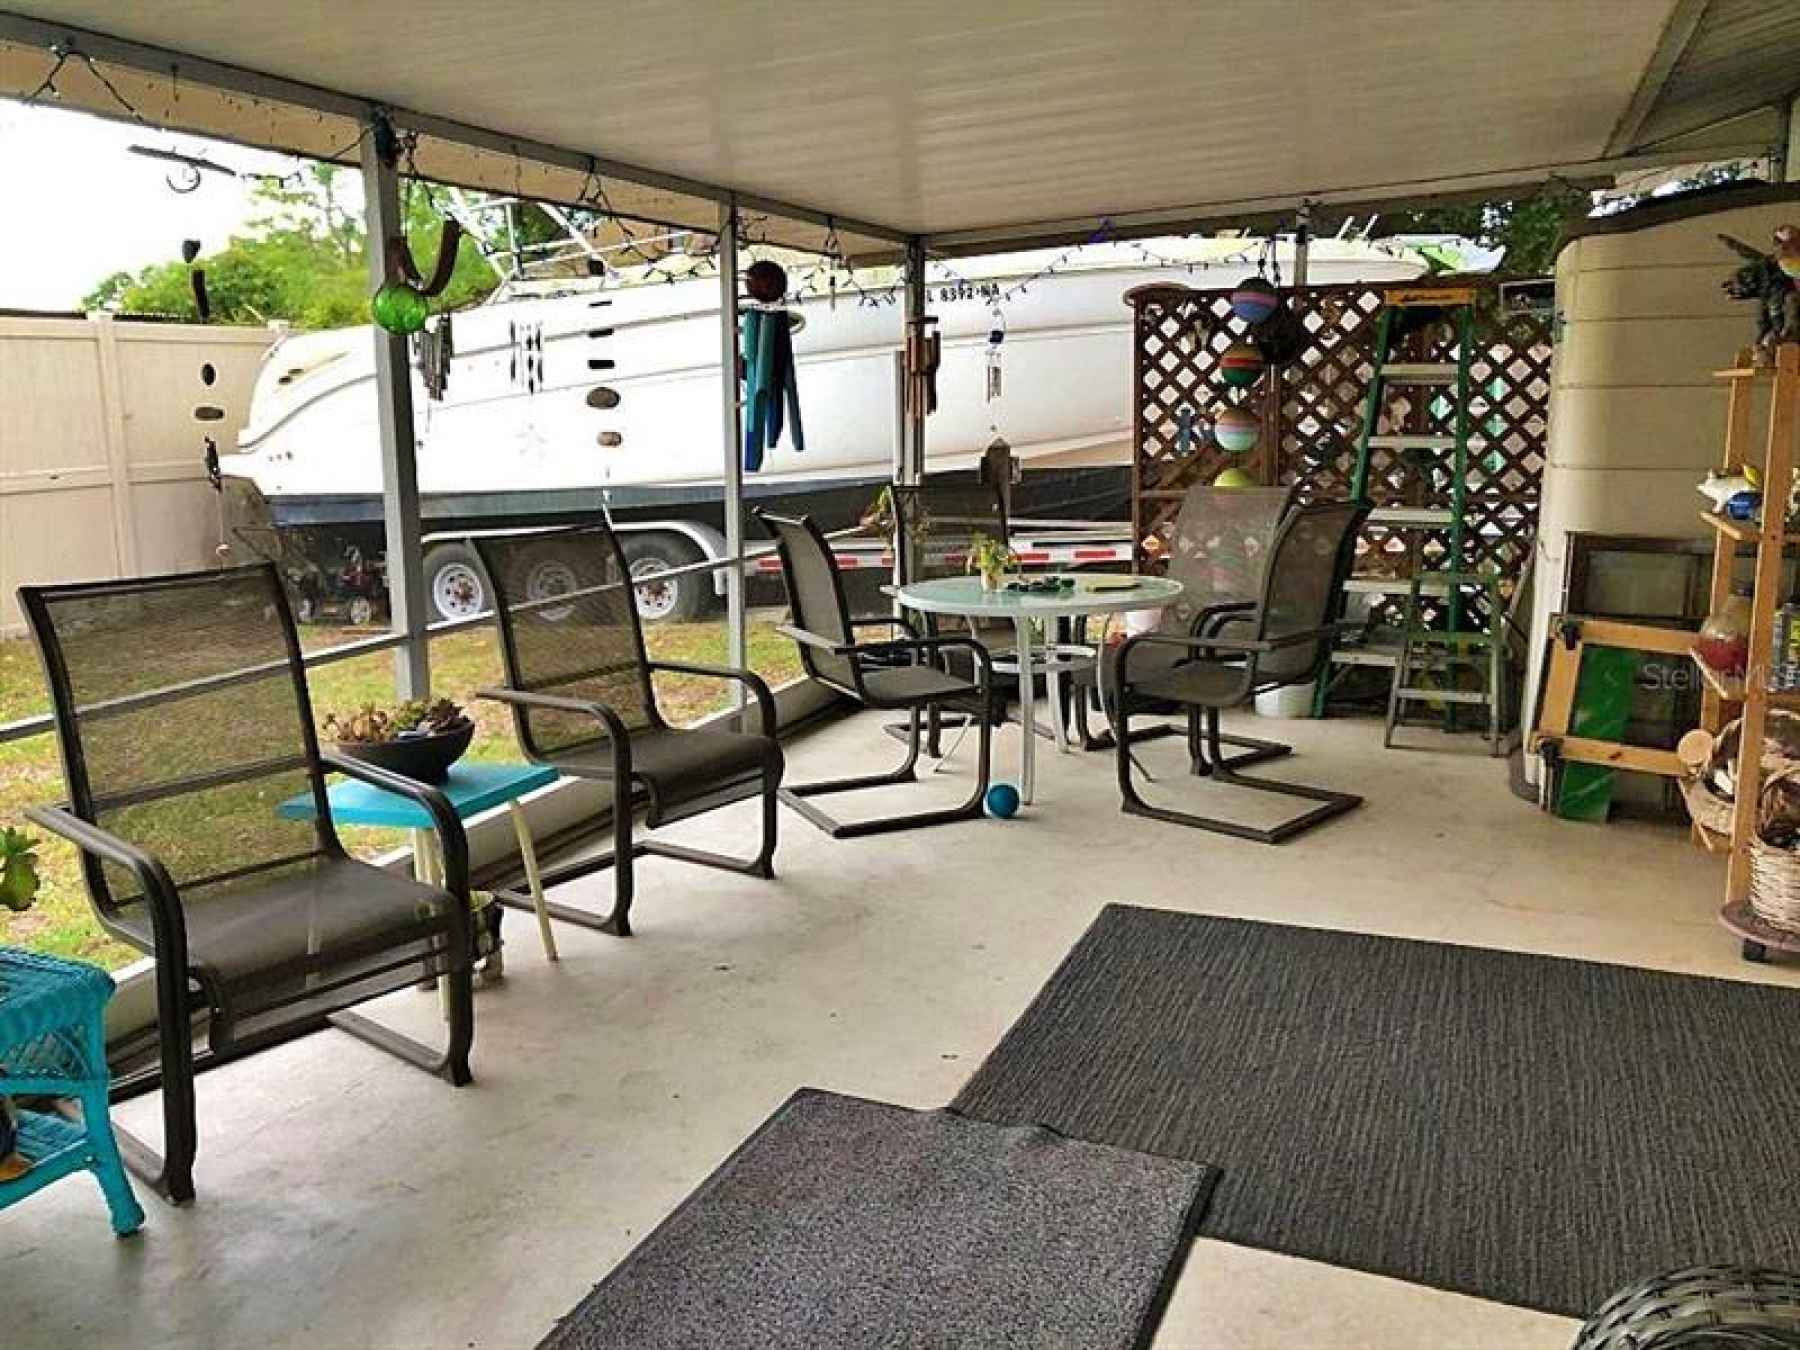 Screened patio with plenty of space for entertaining.